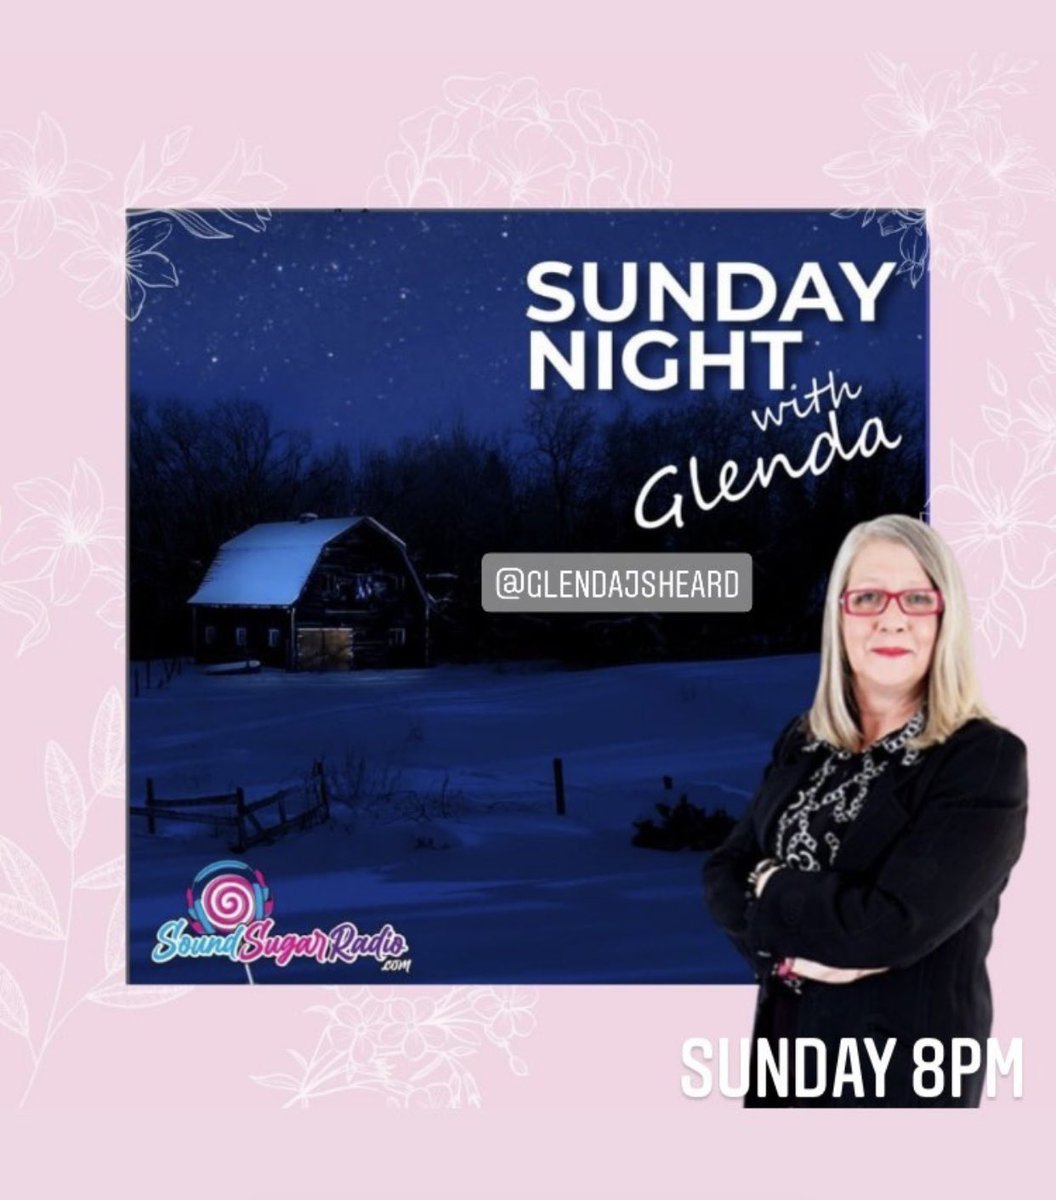 Hope you’ll join me tonight, 8-9pm for Sunday Night With Glenda on @SoundSugarRadio 
Listen to show 123 at soundsugarradio.com OR
Episode 2024-38 on the ‘Keeping it Real’ podcast on your favourite podcast platform. 

#SNWG #talkntunes #Shpk #strathconacounty #GlobalListening